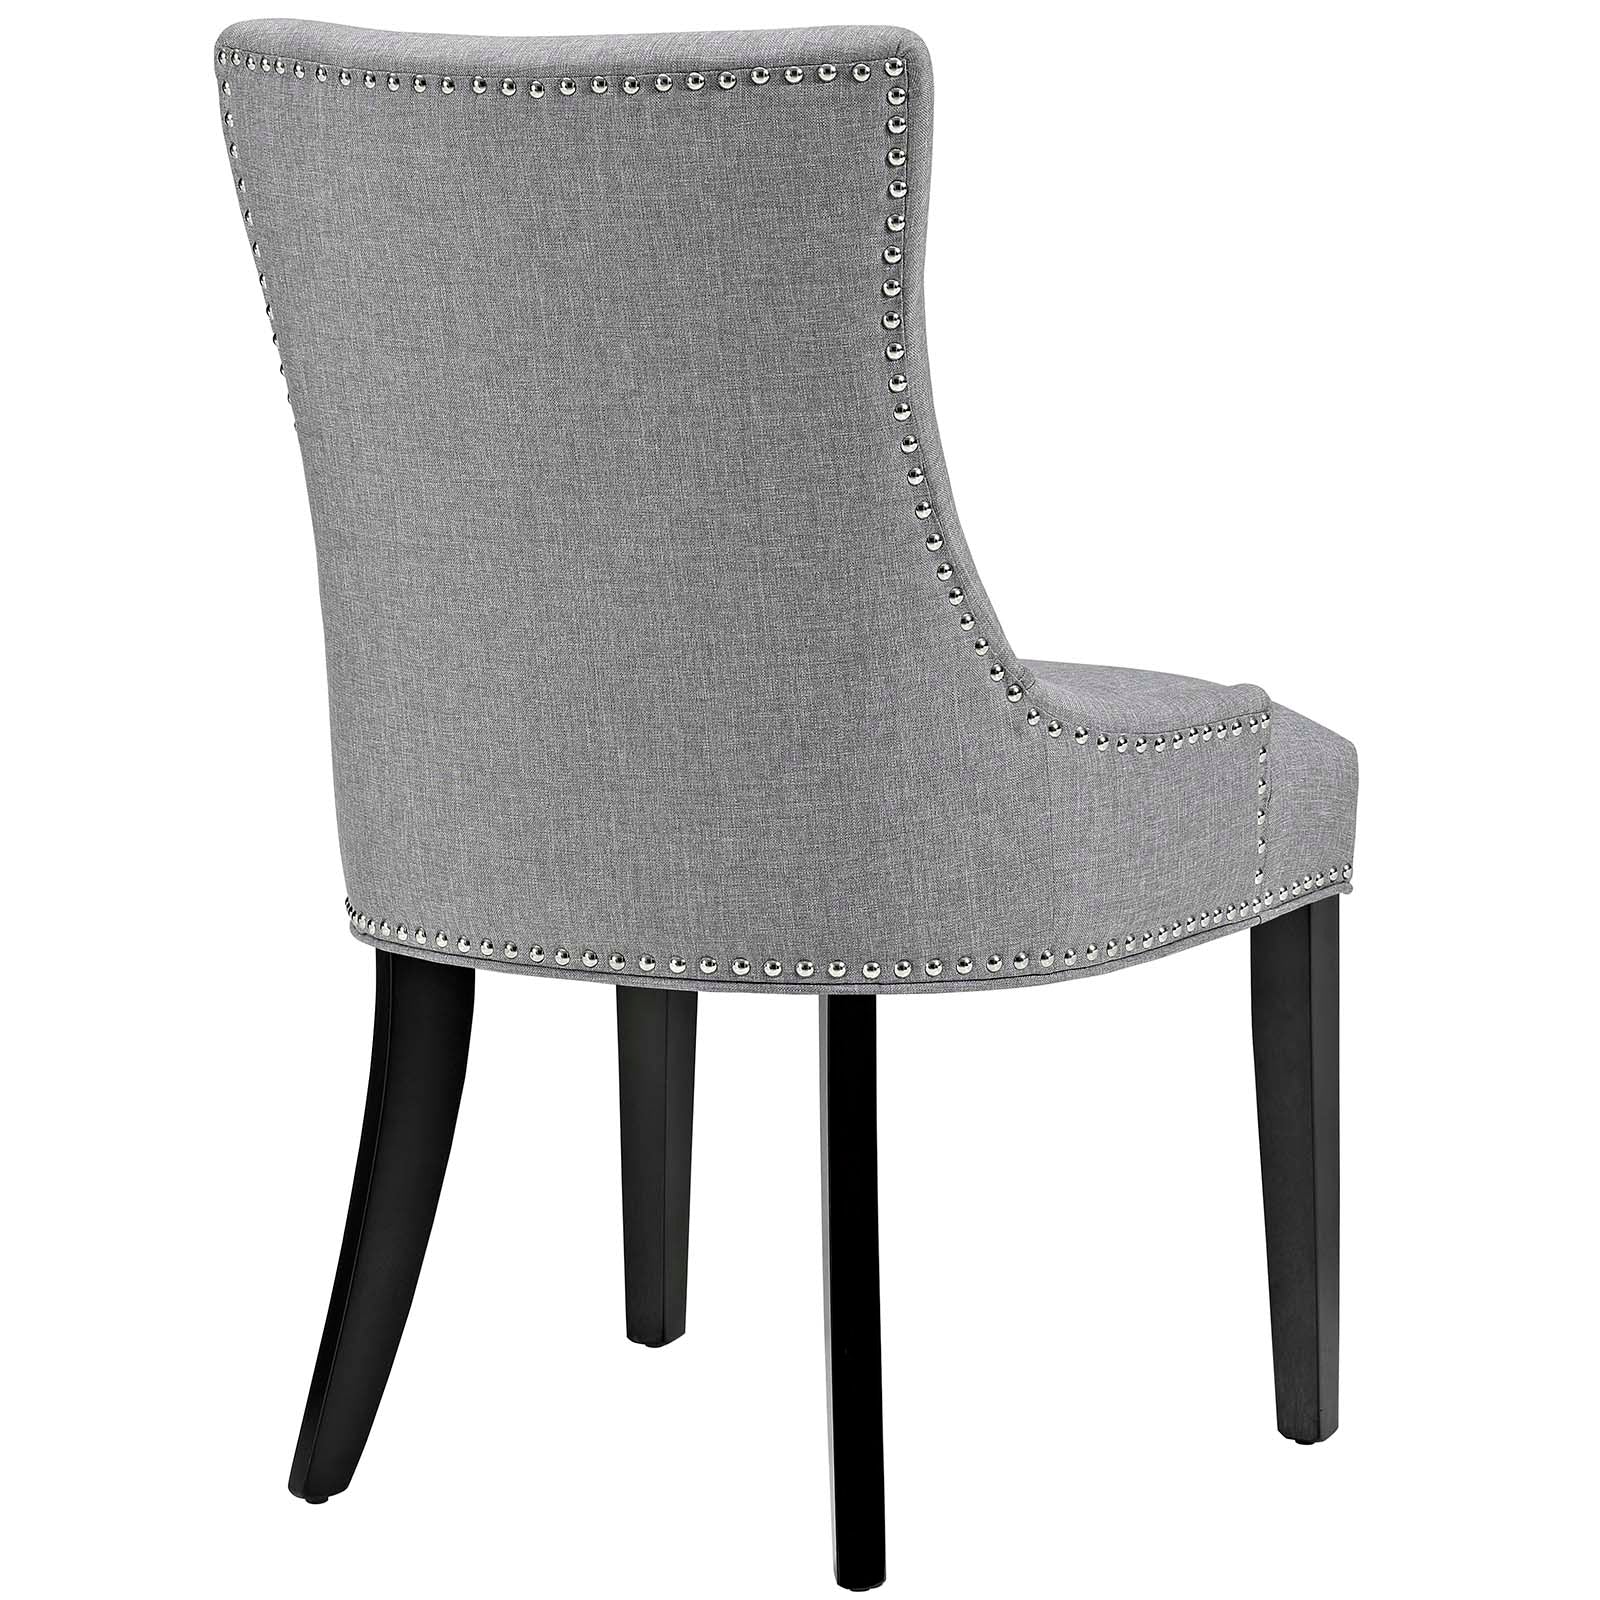 Modway Dining Chairs - Marquis Dining Chair Fabric Light Gray (Set of 4)